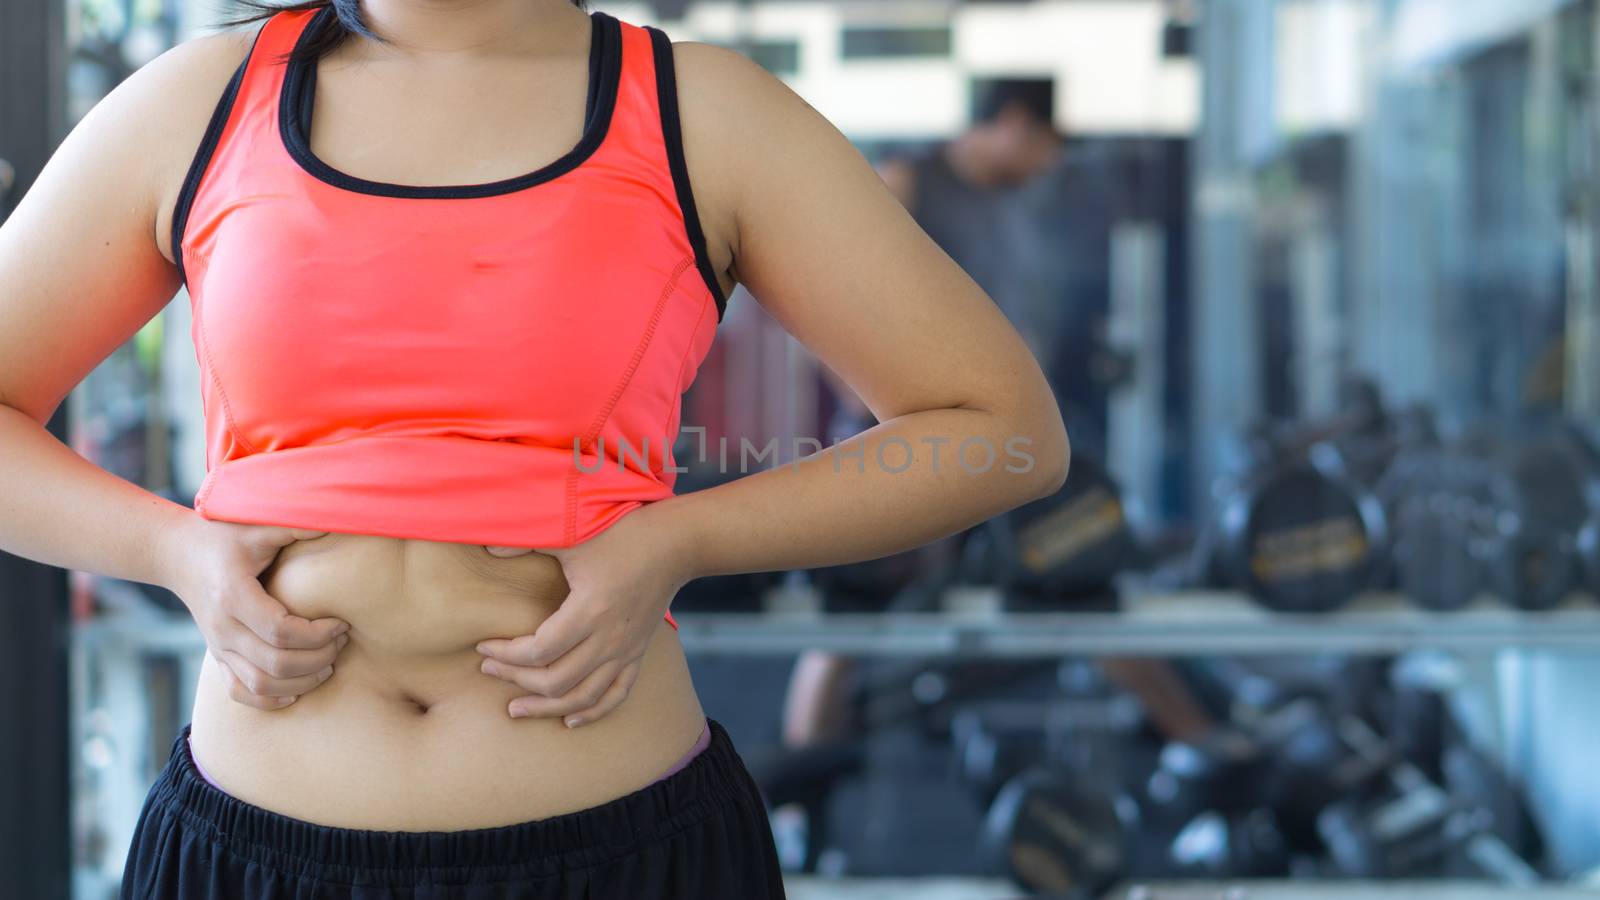 Close up woman holding excessive fat belly. Woman overweight abdomen. Woman diet lifestyle concept reduce belly and shape up healthy stomach muscle. Weight loss, slim body, healthy lifestyle concept.